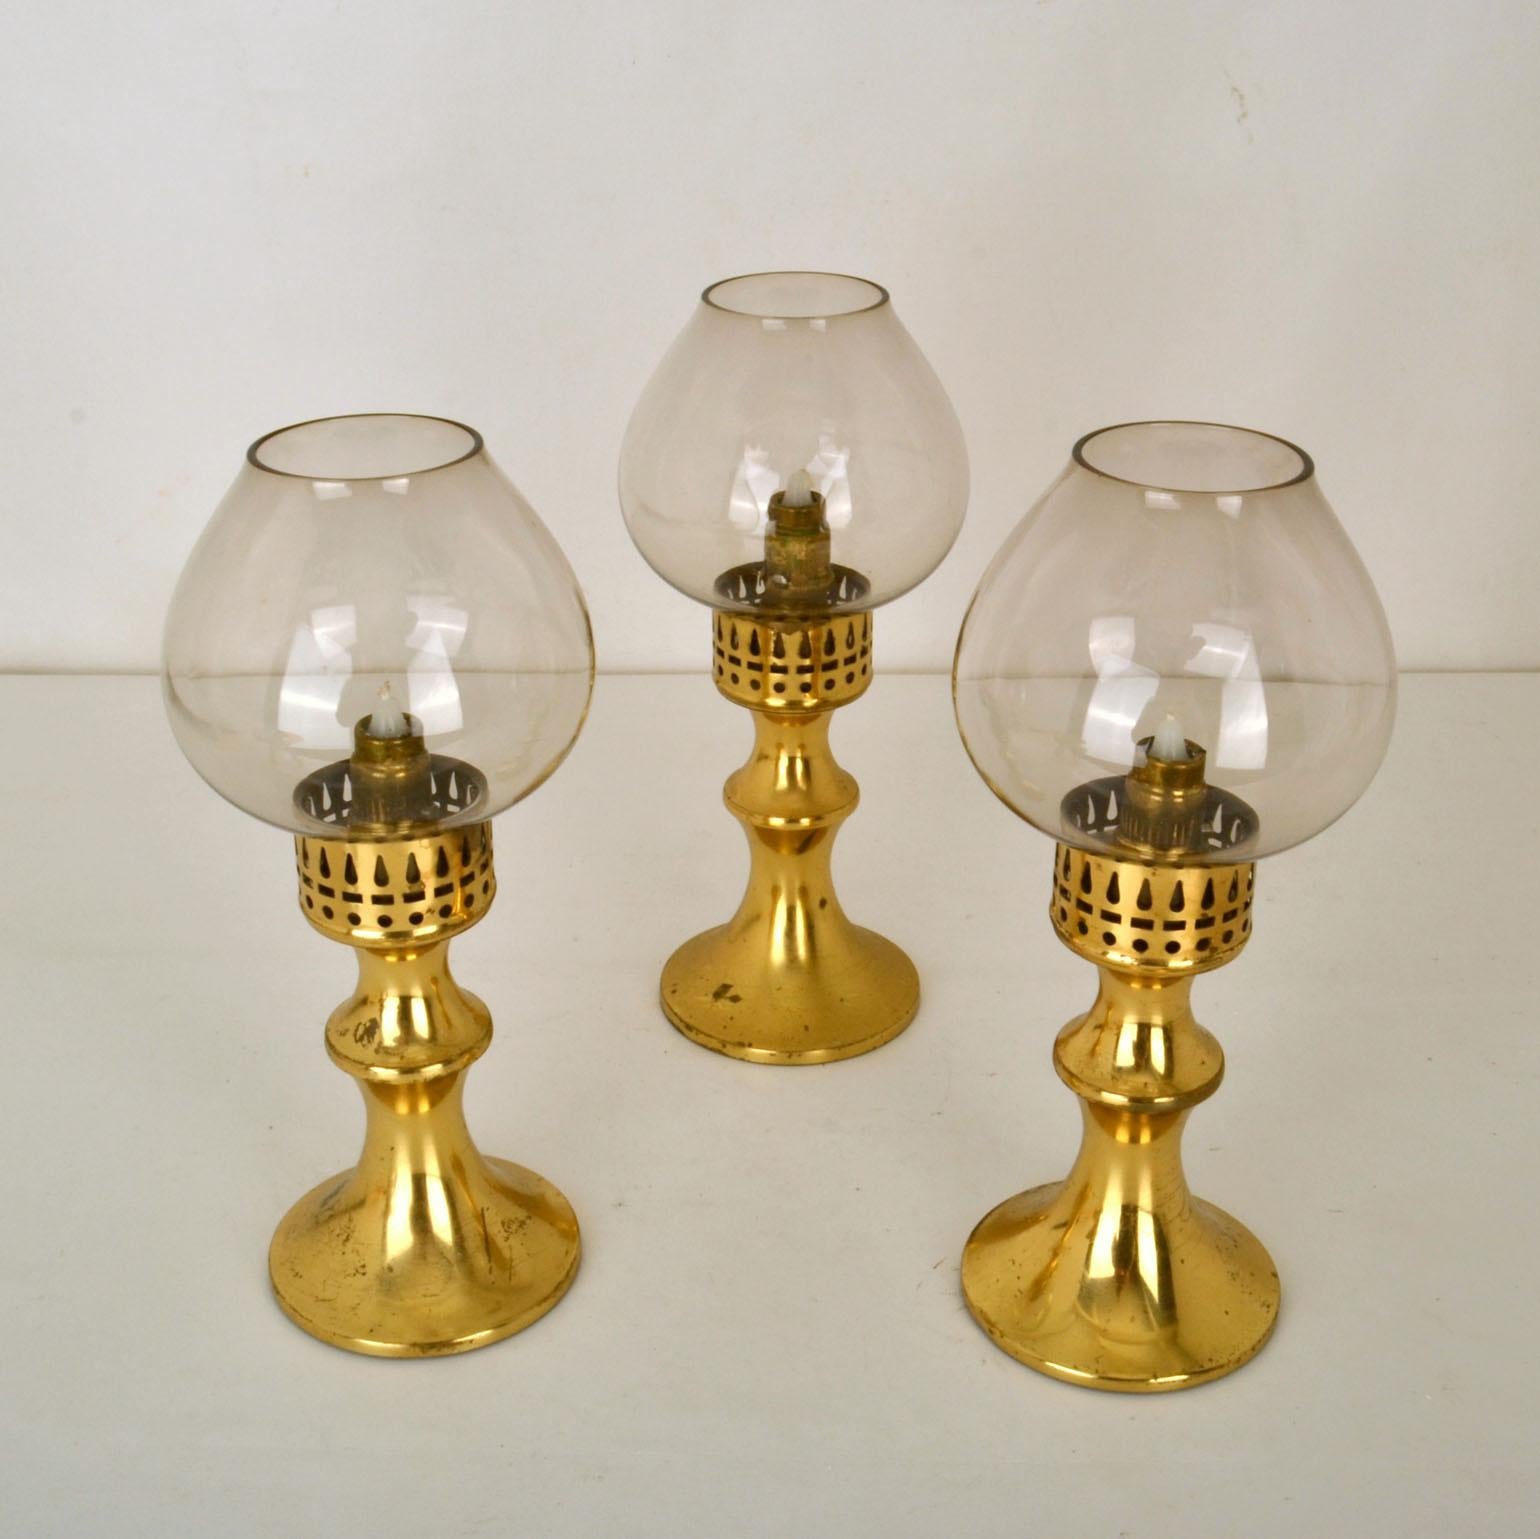 Set of three brass lantern candle holders with tinted glass diffusers, Scandinavian Modern 1960's. They are suitable for indoor and outdoor use.
They have a clever internal push up spring system for the candles so that it looks like they are oil